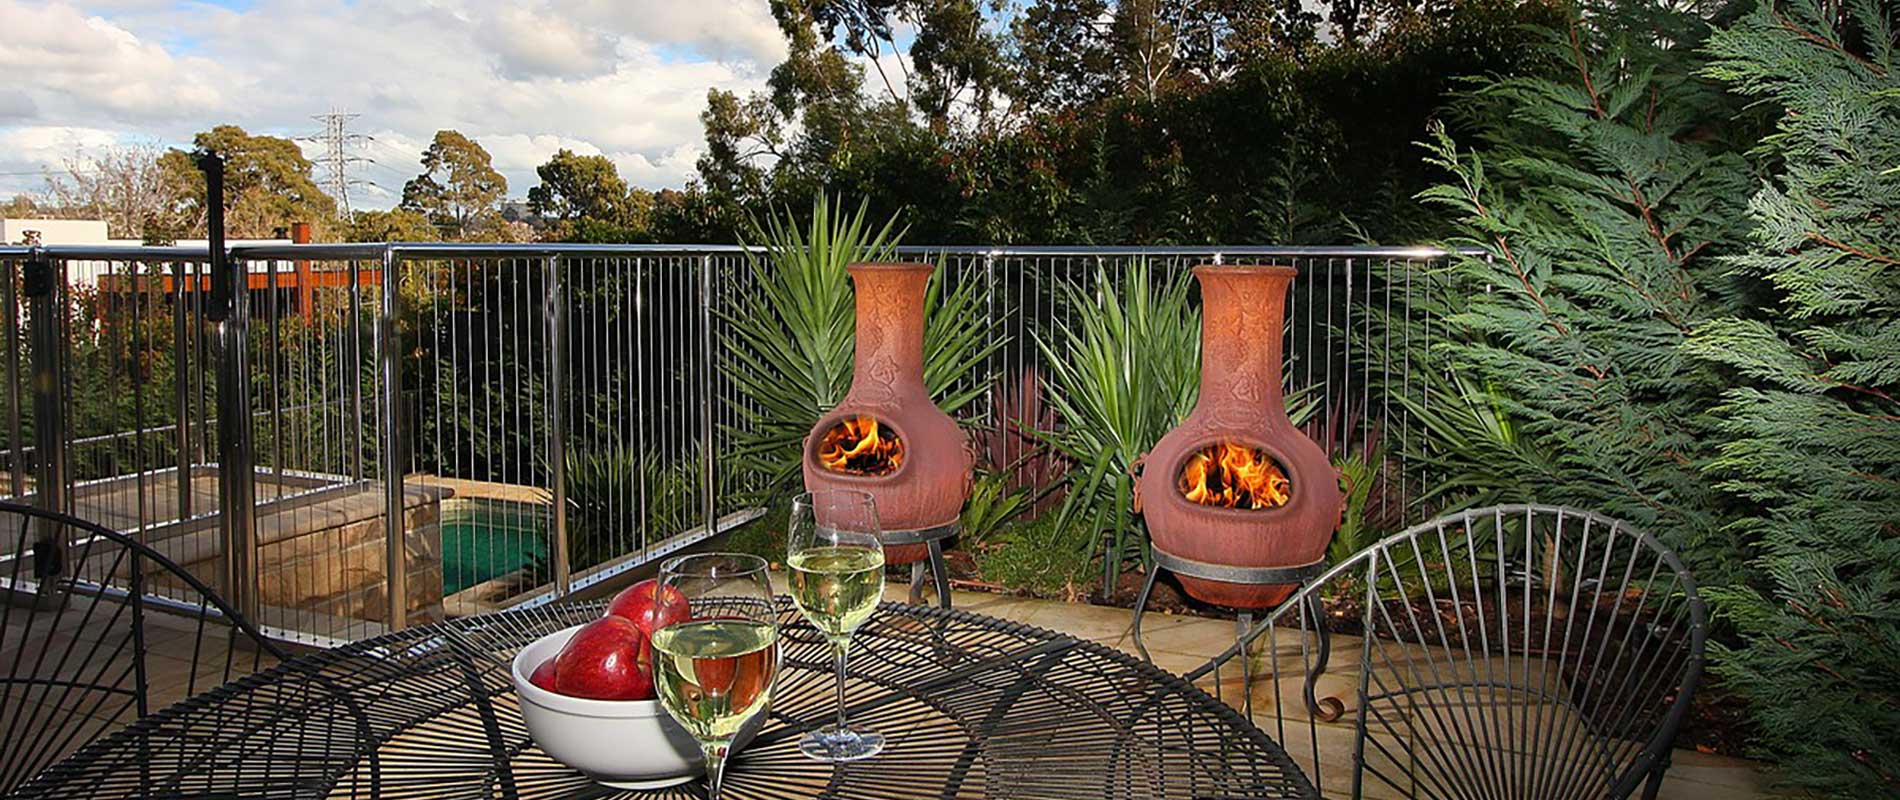 Aussie Heatwave Outdoor Fireplaces, Chiminea Fire Pit Pizza Oven